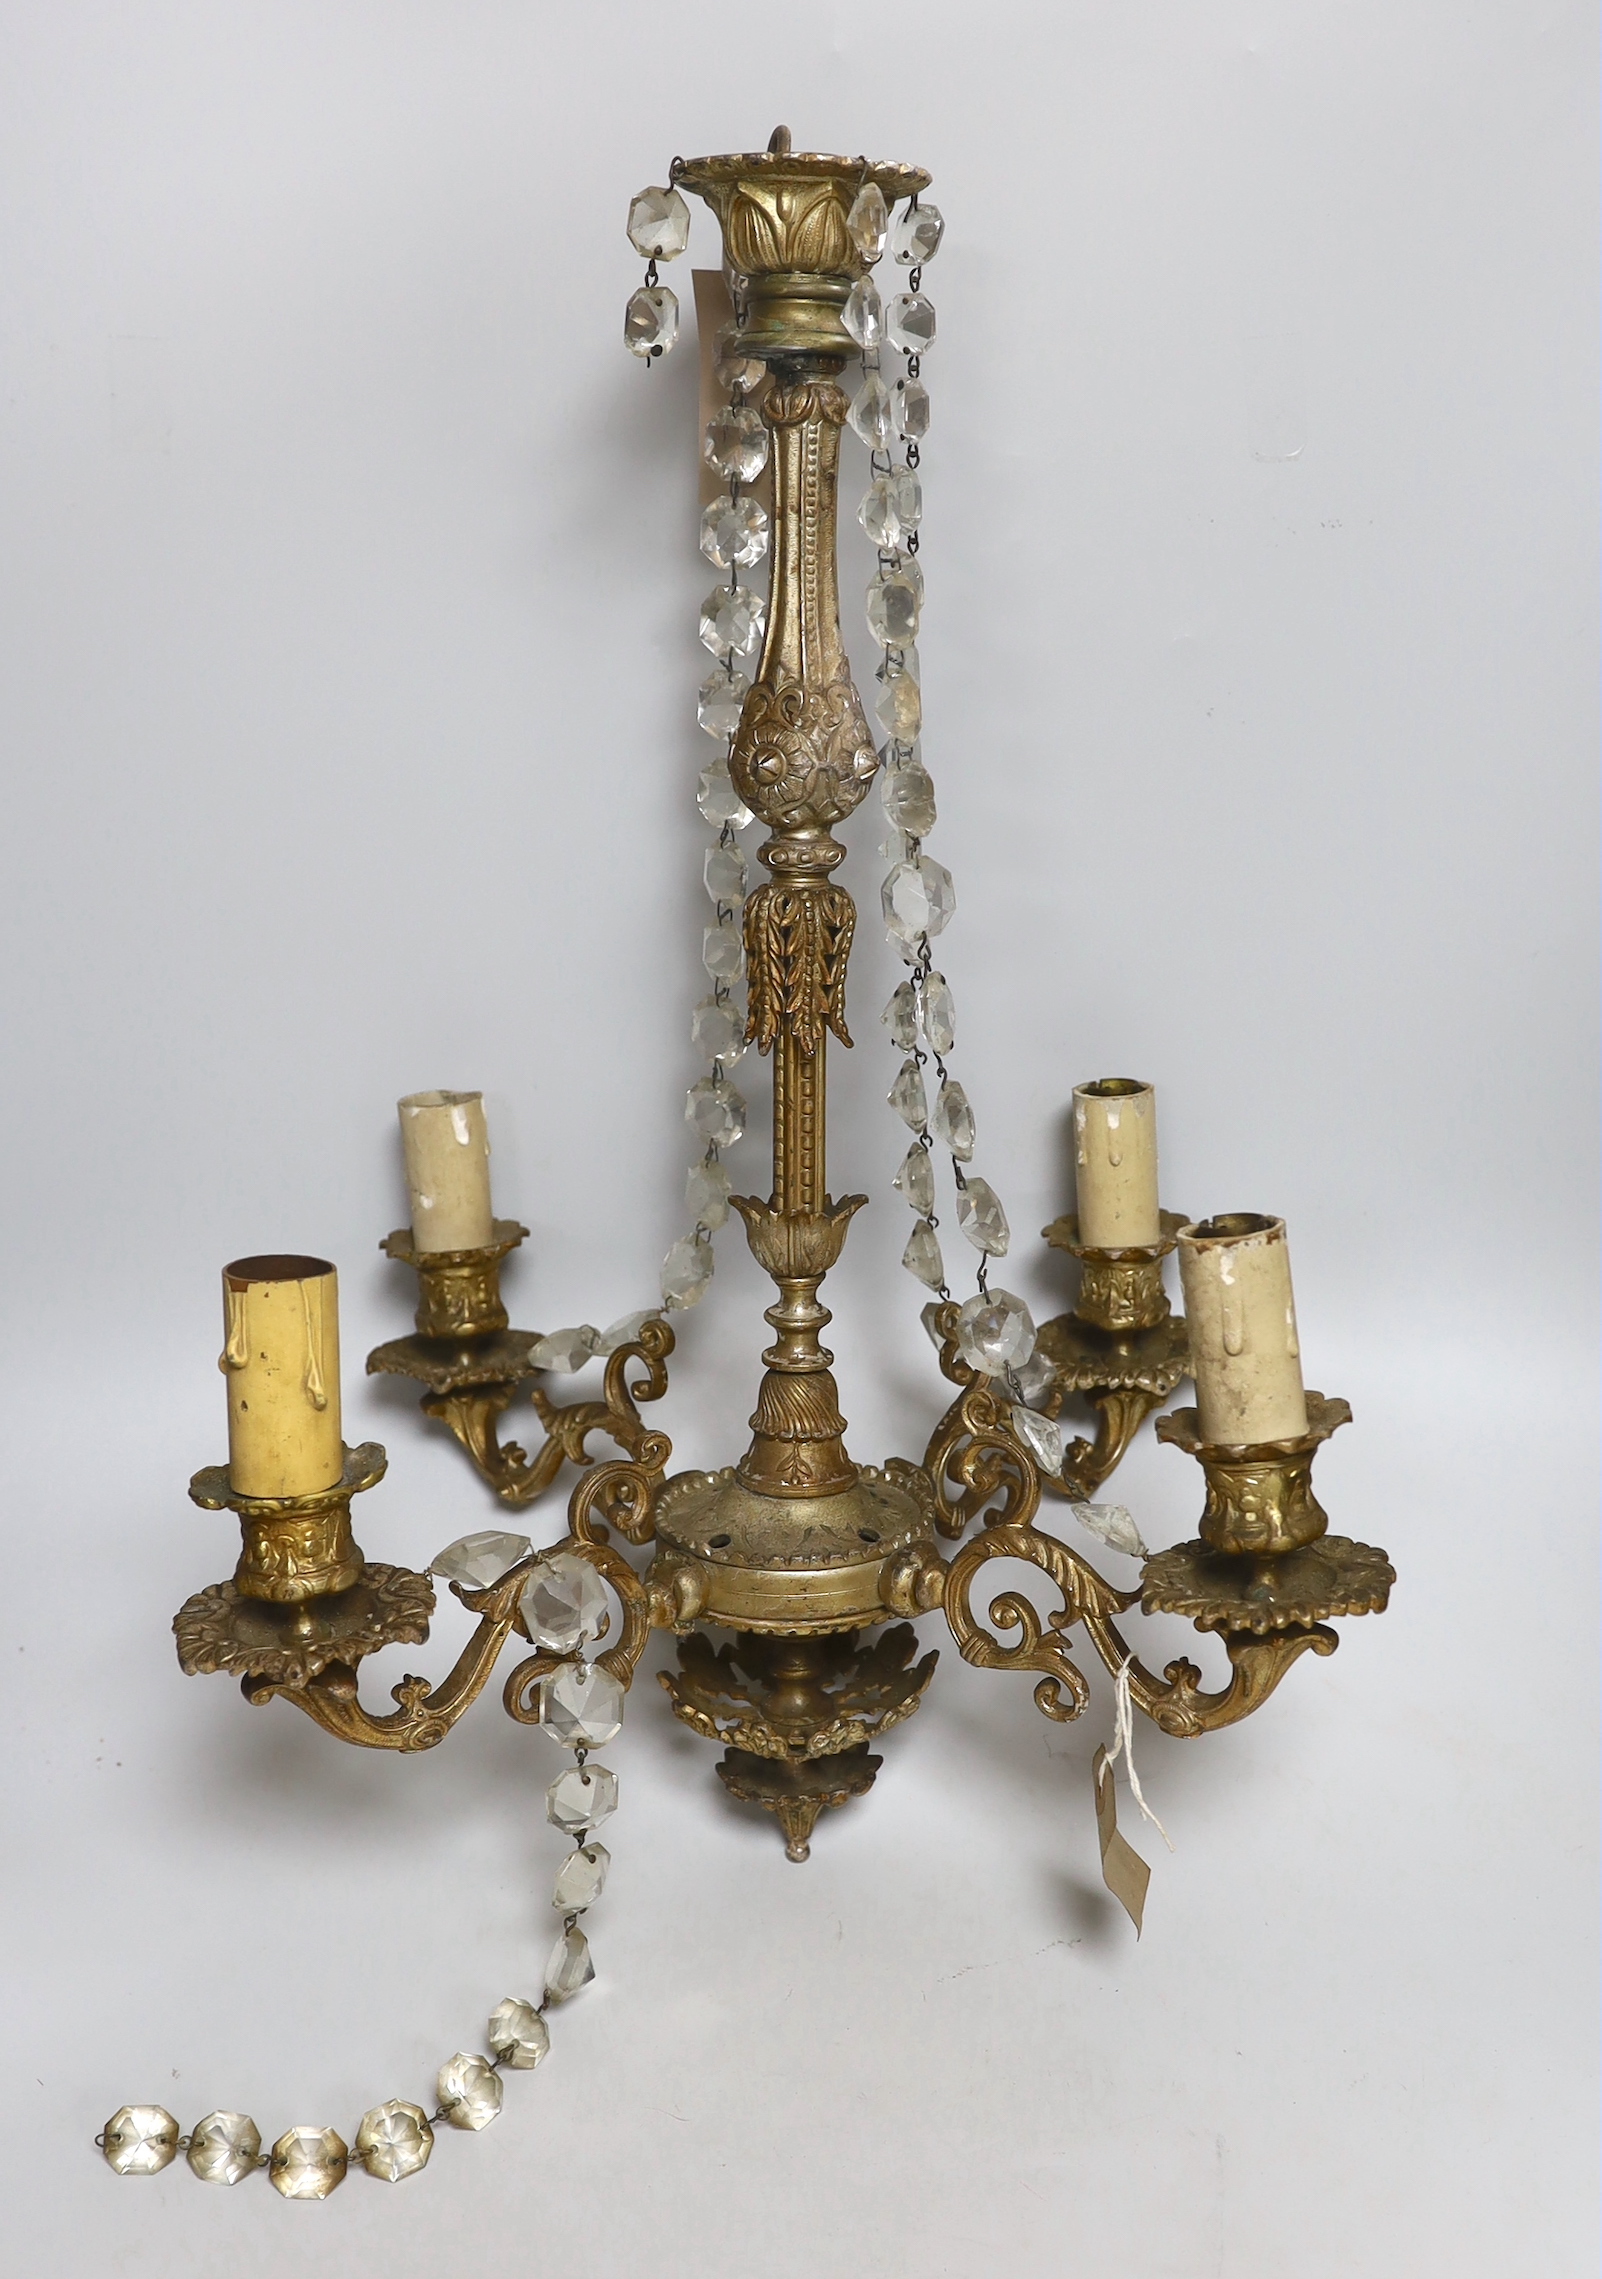 Two gilt metal four-branch chandeliers, with some crystal drops, the largest 52cm high